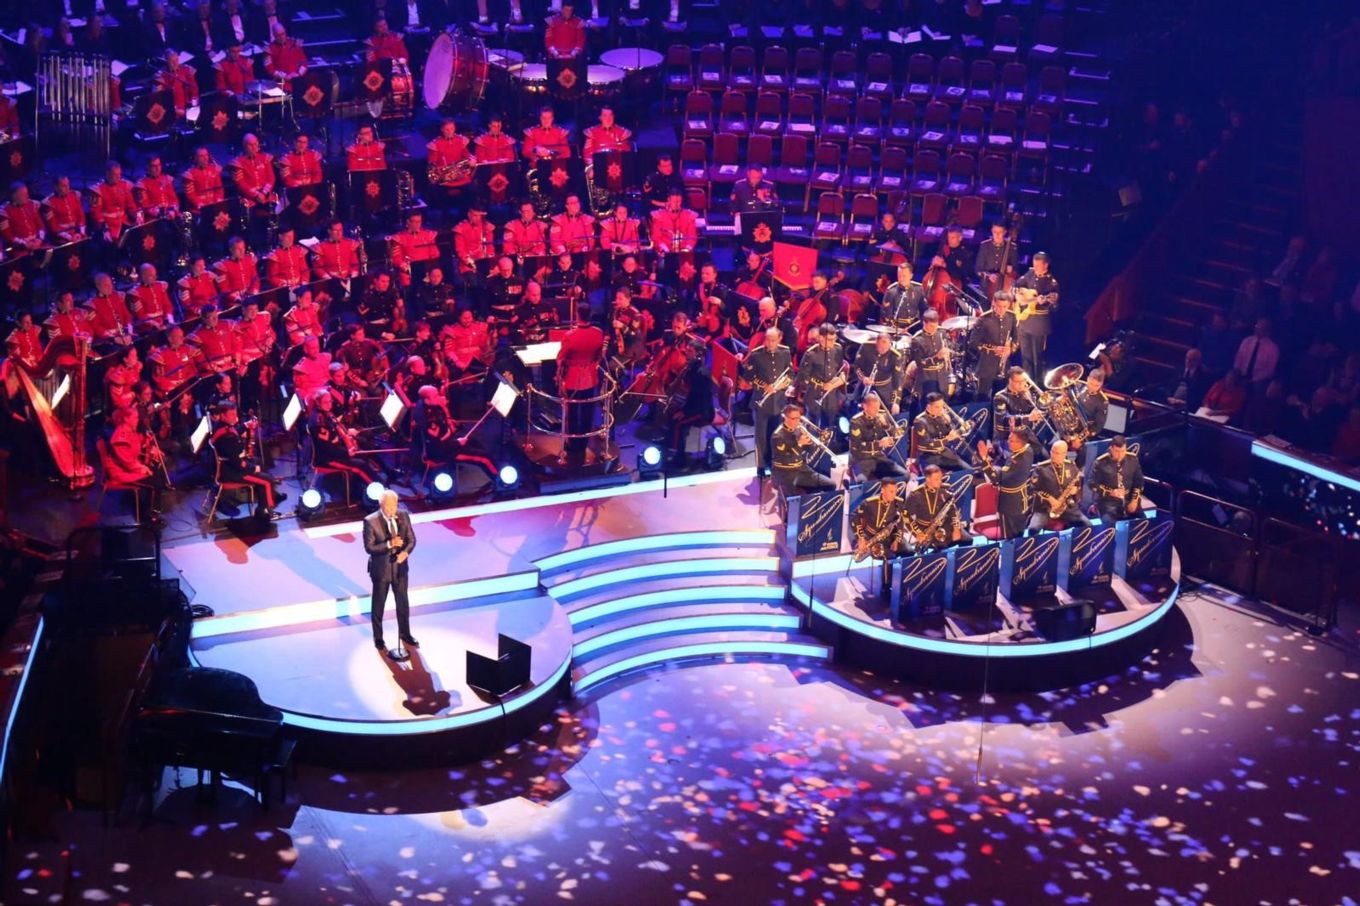 Military musicians perform a concert in the Royal Albert Hall.